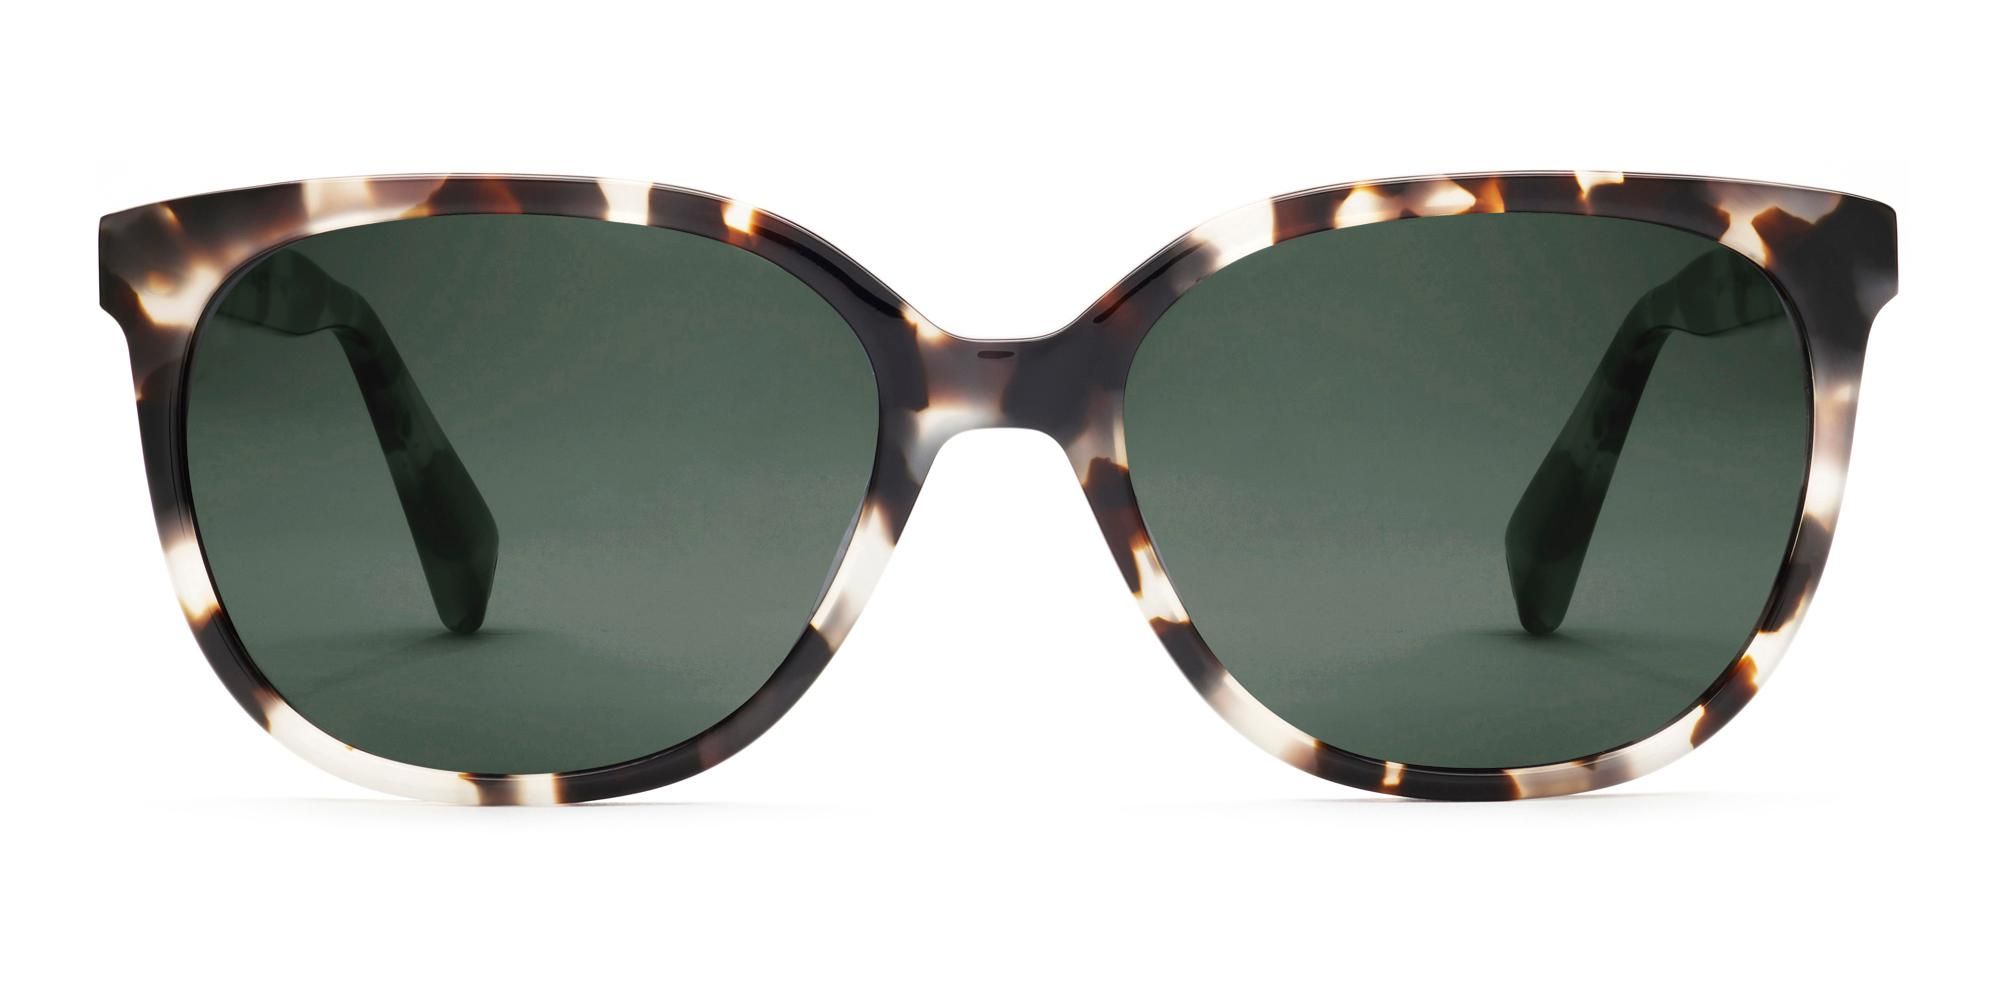 Raglan Sunglasses in Pearled Tortoise with Green Grey lenses for Women | Warby Parker